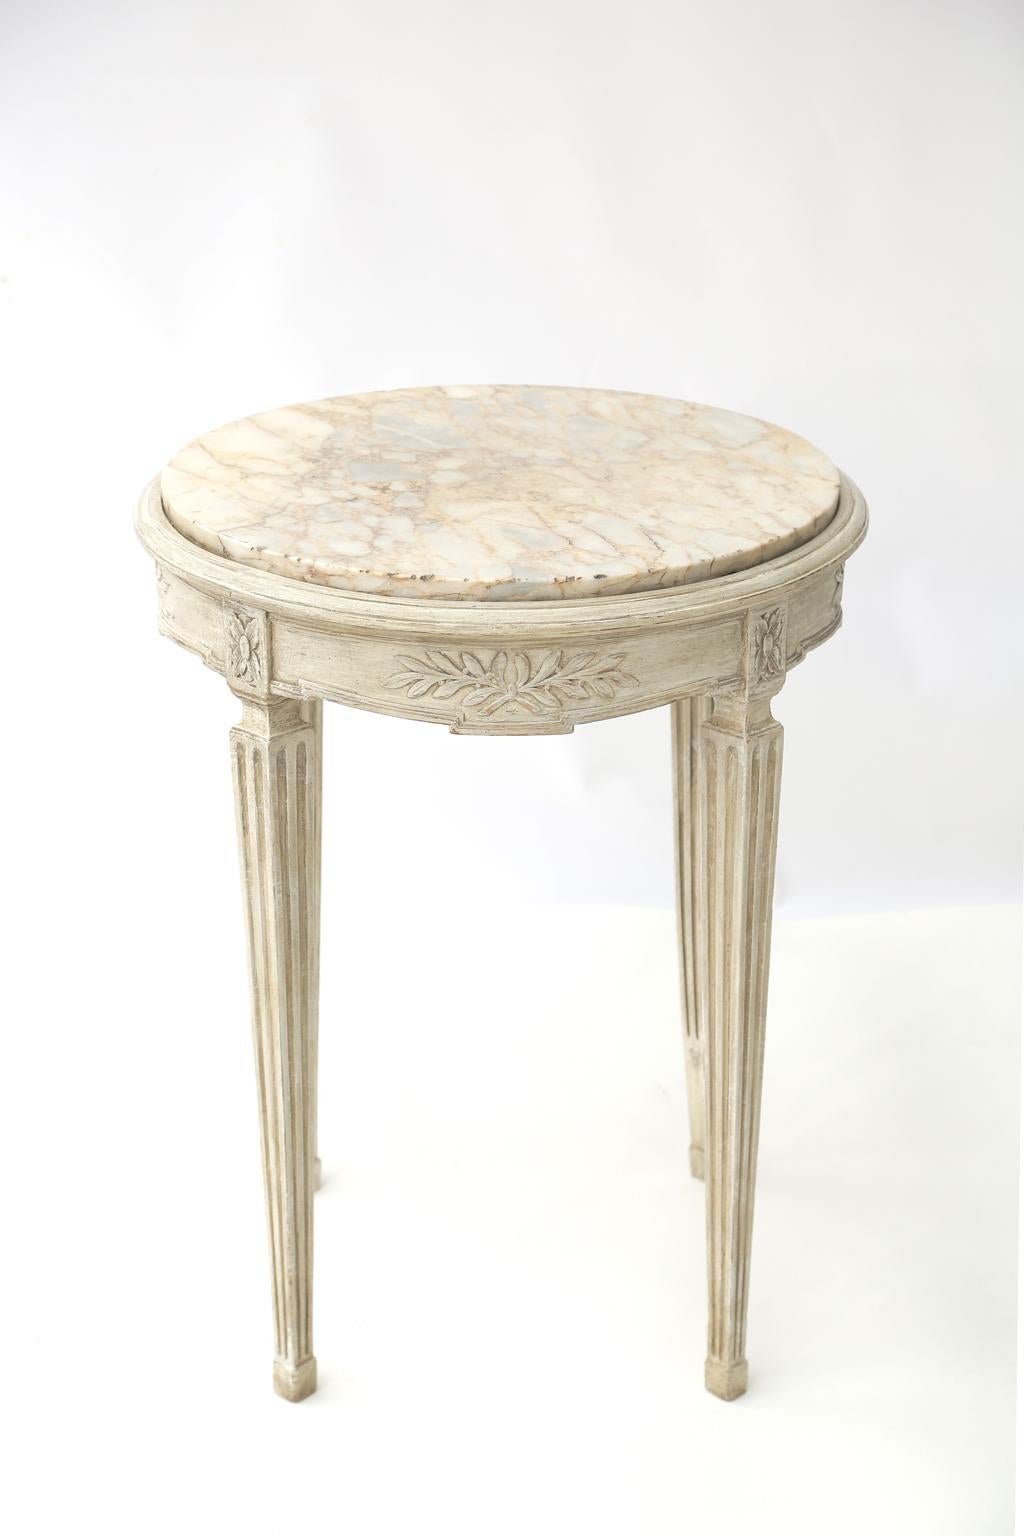 Painted French 19th Century Occasional Table with Round Marble Top In Good Condition For Sale In West Palm Beach, FL